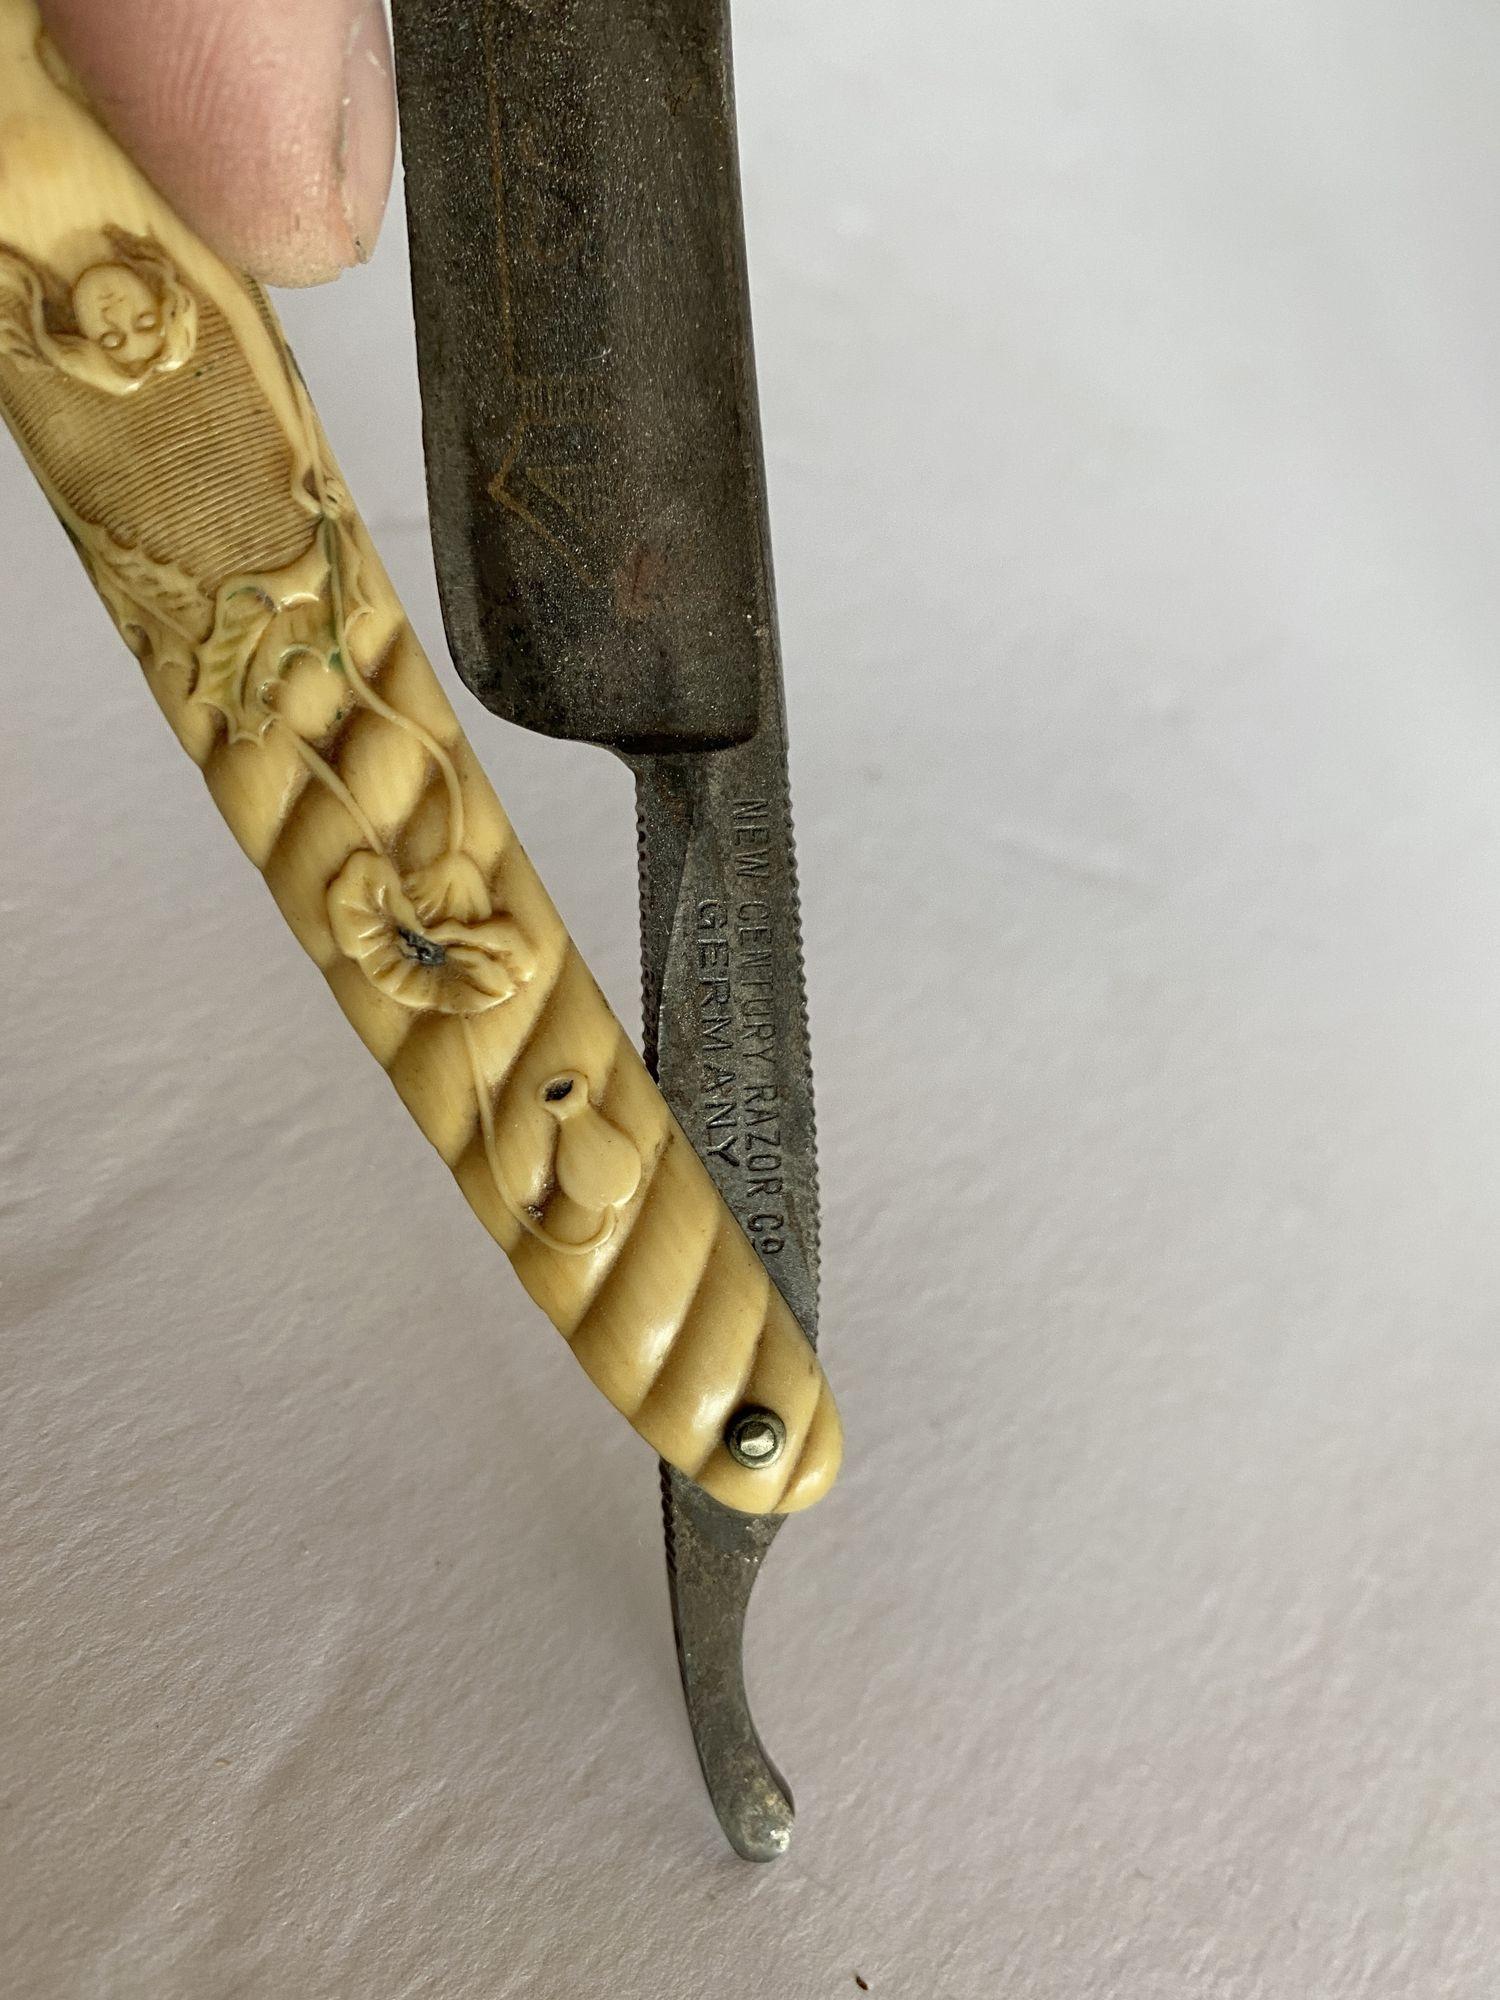 Early 20th Century Rare Nude Art Nouveau Ripped Celluloid Straight Razor by Ern. C. Friedr For Sale